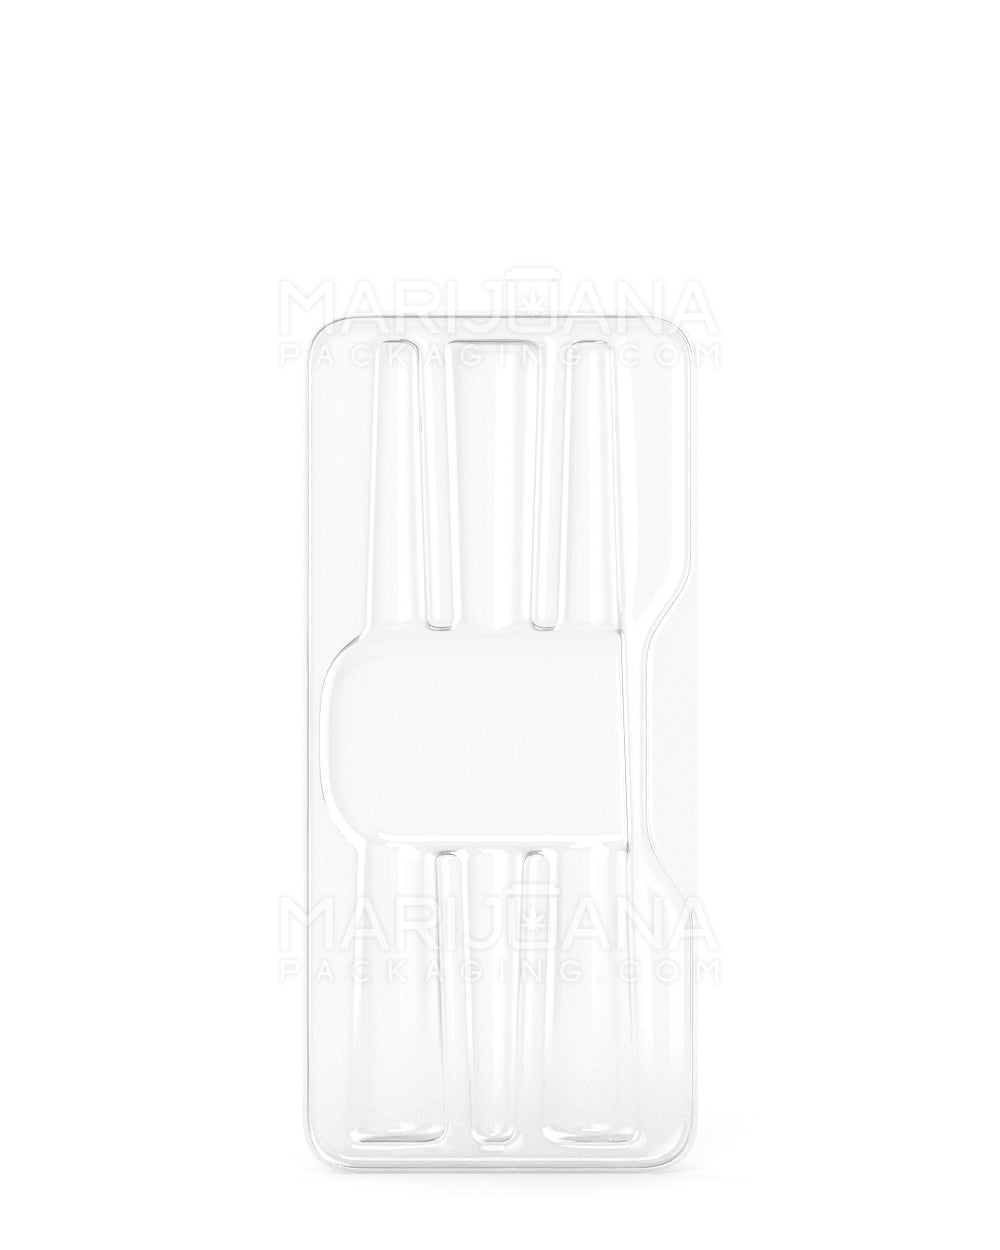 Edible & Joint Box Insert Tray for 3 King Size Pre Rolled Cones | 109mm - Clear Plastic | Sample - 1